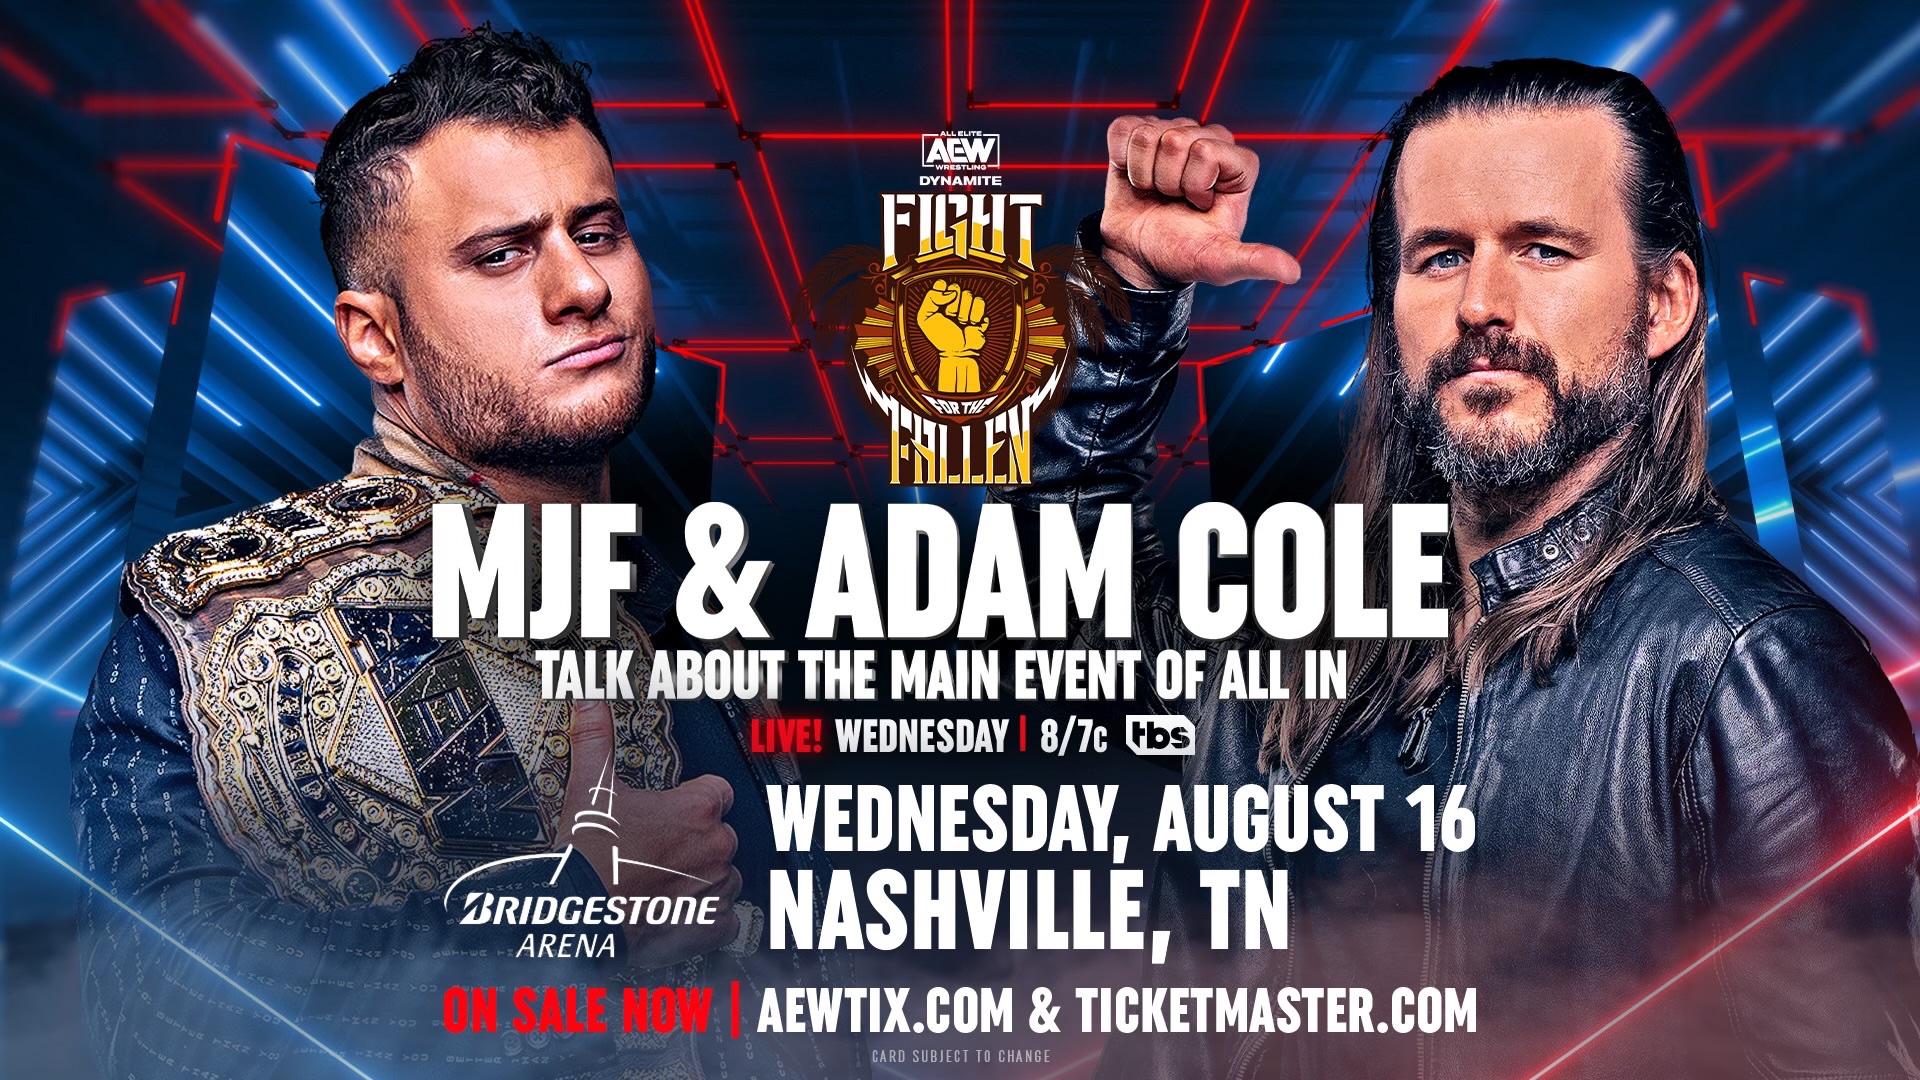 An AEW Dynamite match graphics hyping up MJF and Adam Cole's appearance on the special "Fight for the Fallen" edition of the program.